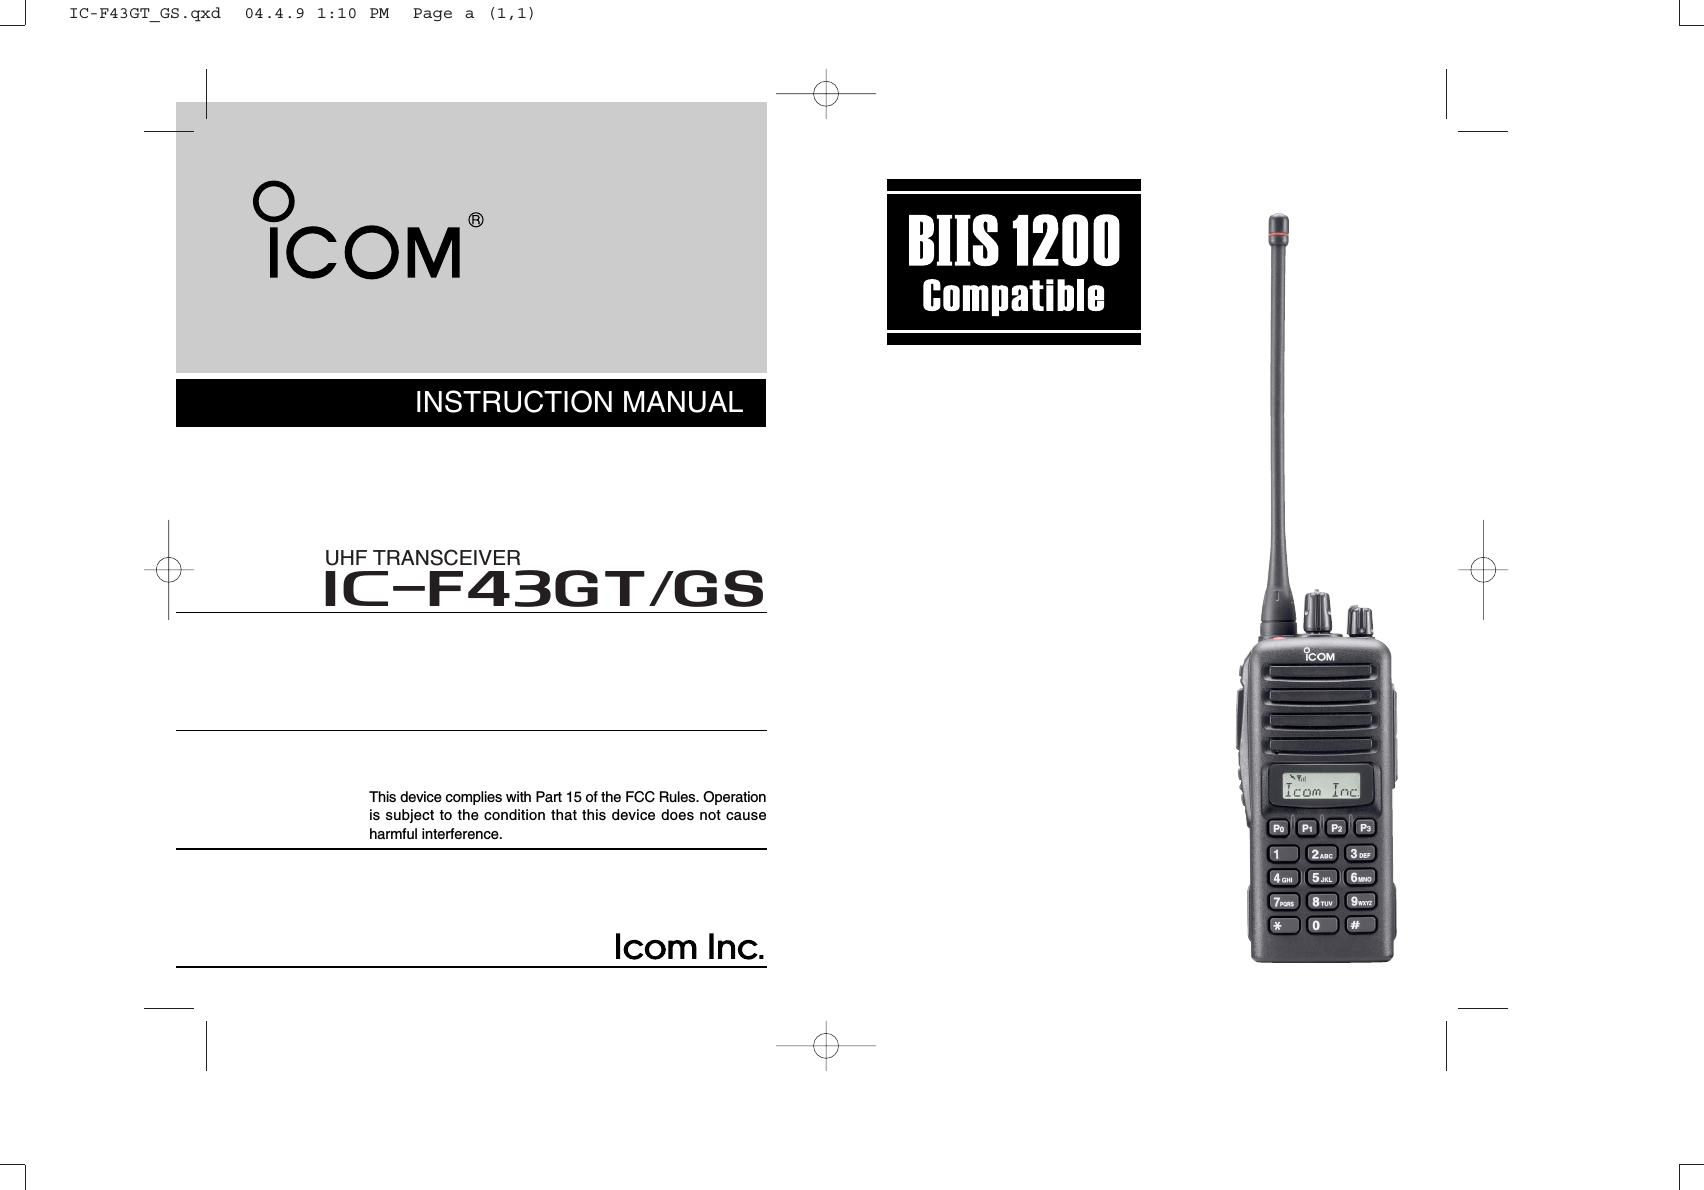 INSTRUCTION MANUALThis device complies with Part 15 of the FCC Rules. Operationis subject to the condition that this device does not causeharmful interference.iF43GT/GSUHF TRANSCEIVERIC-F43GT_GS.qxd  04.4.9 1:10 PM  Page a (1,1)